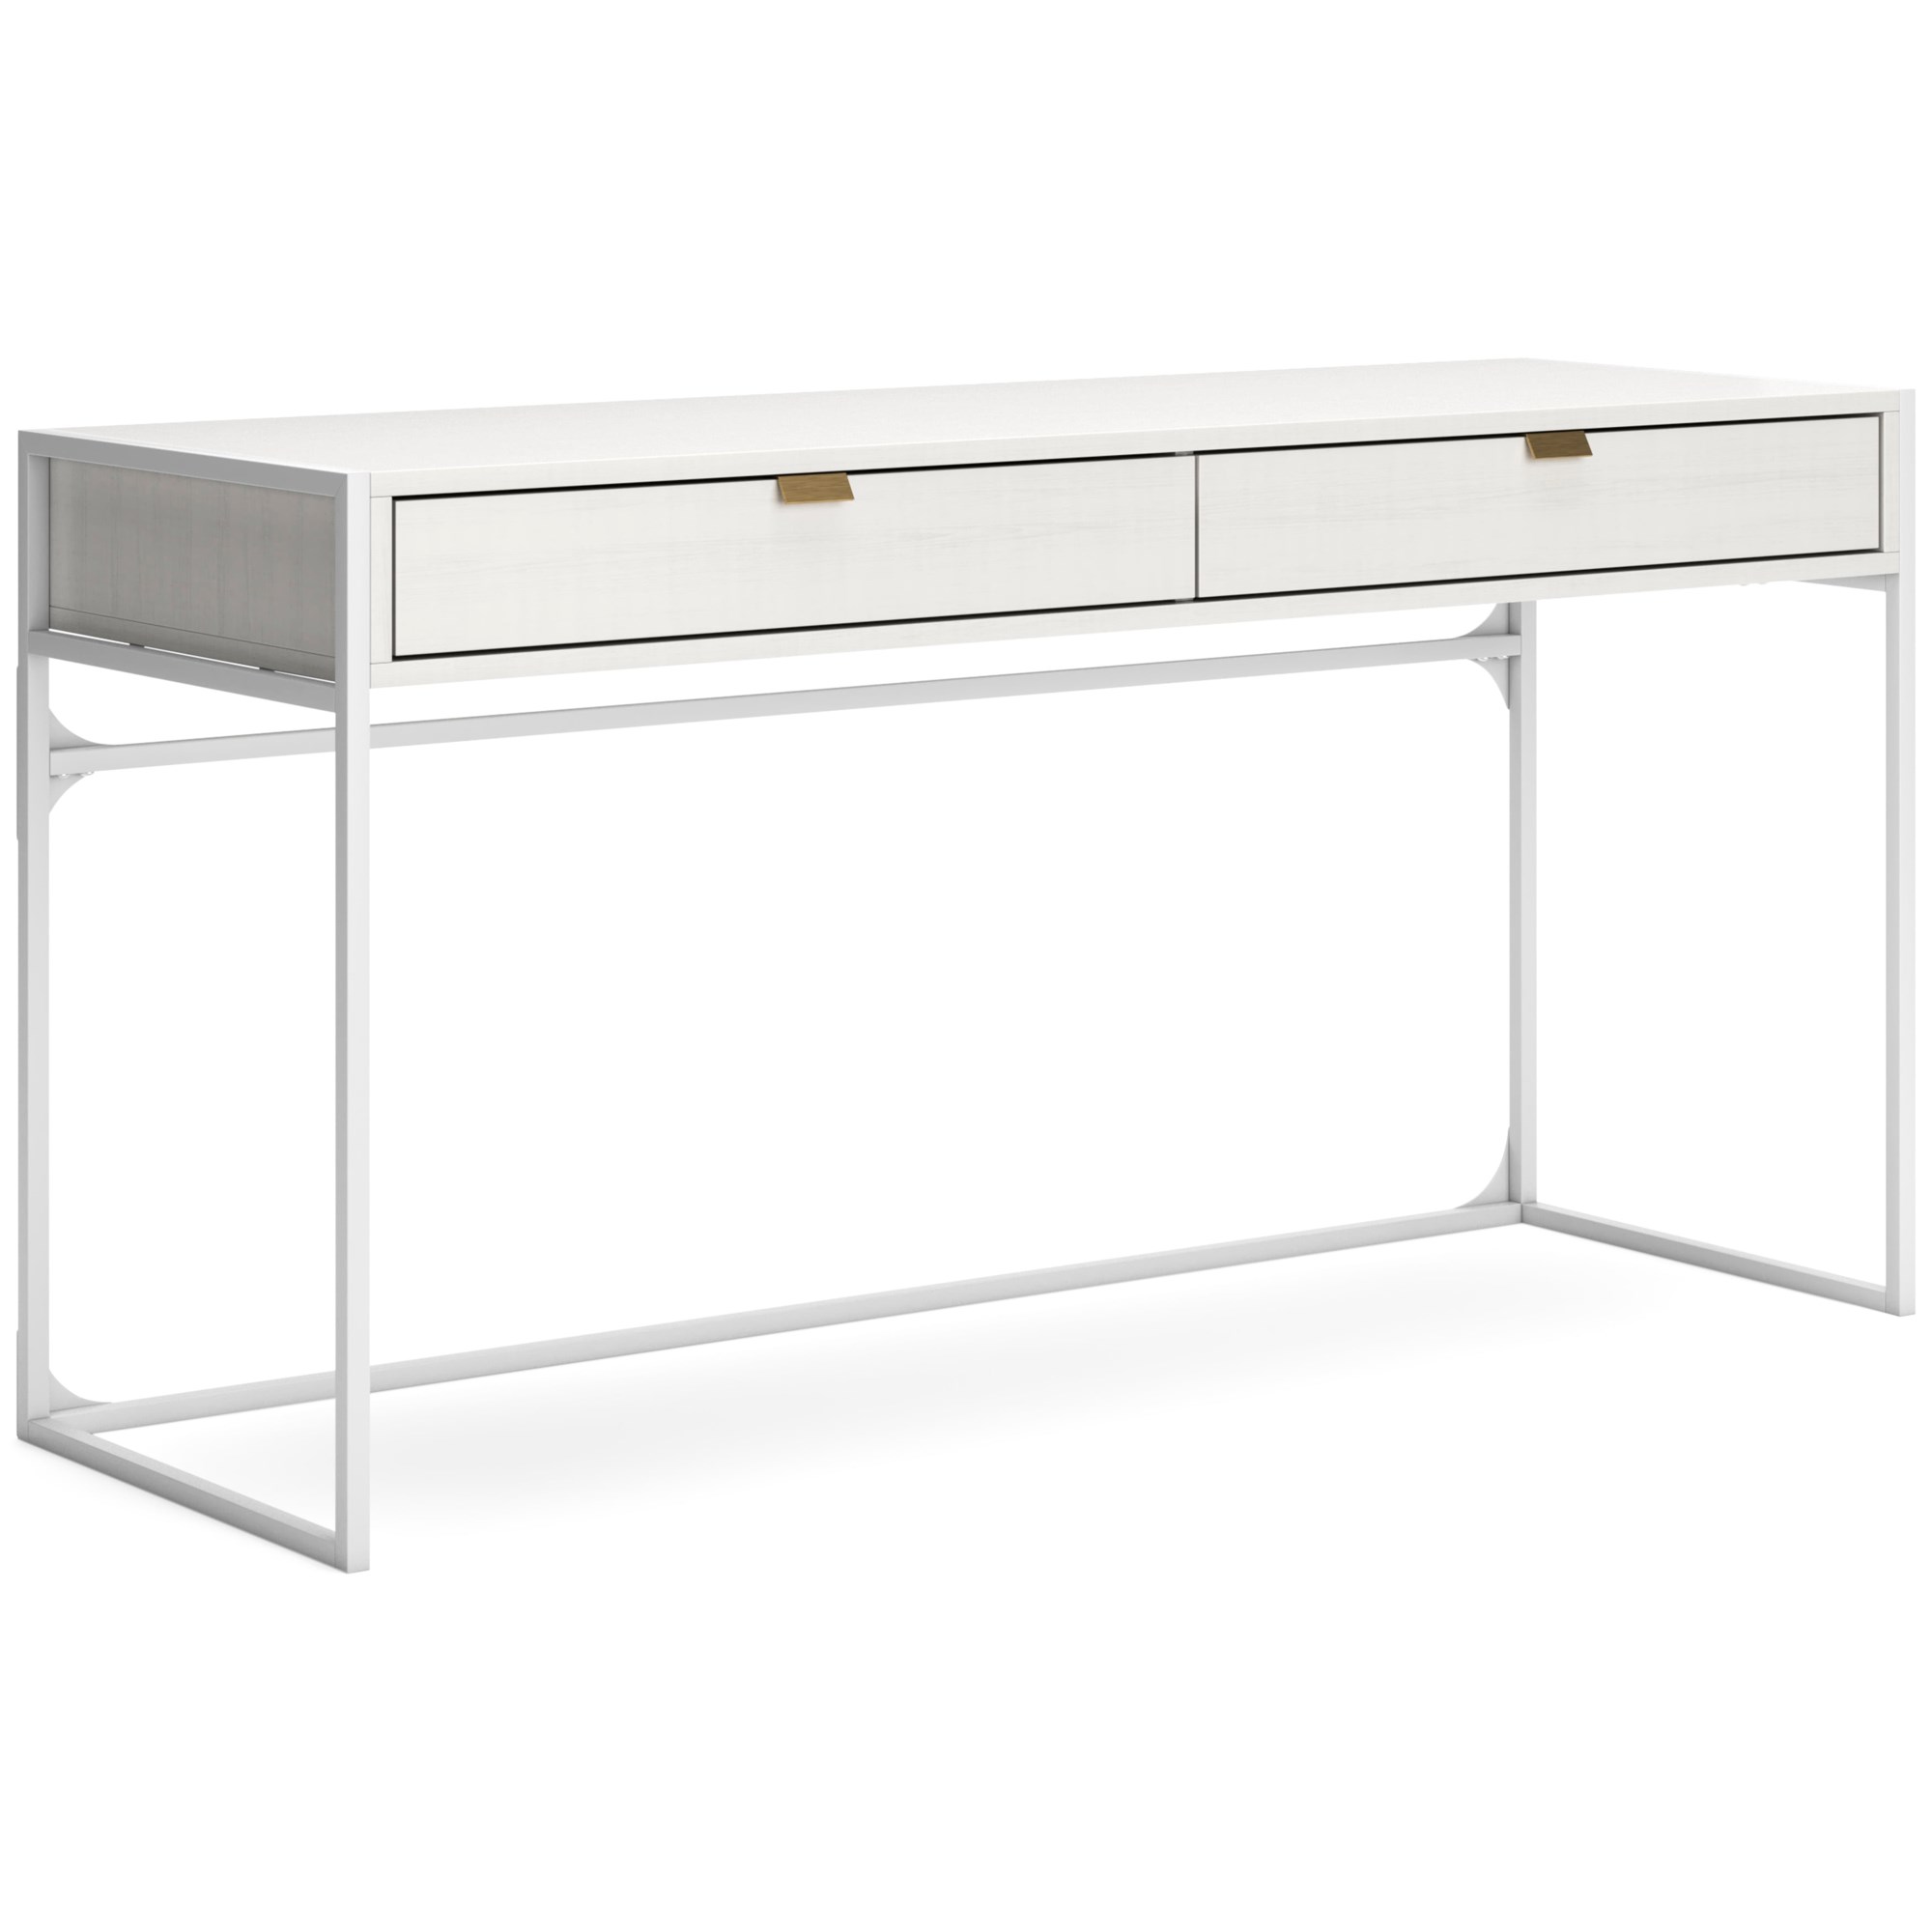 Signature Design by Ashley Thadamere Home Office Desk & Reviews